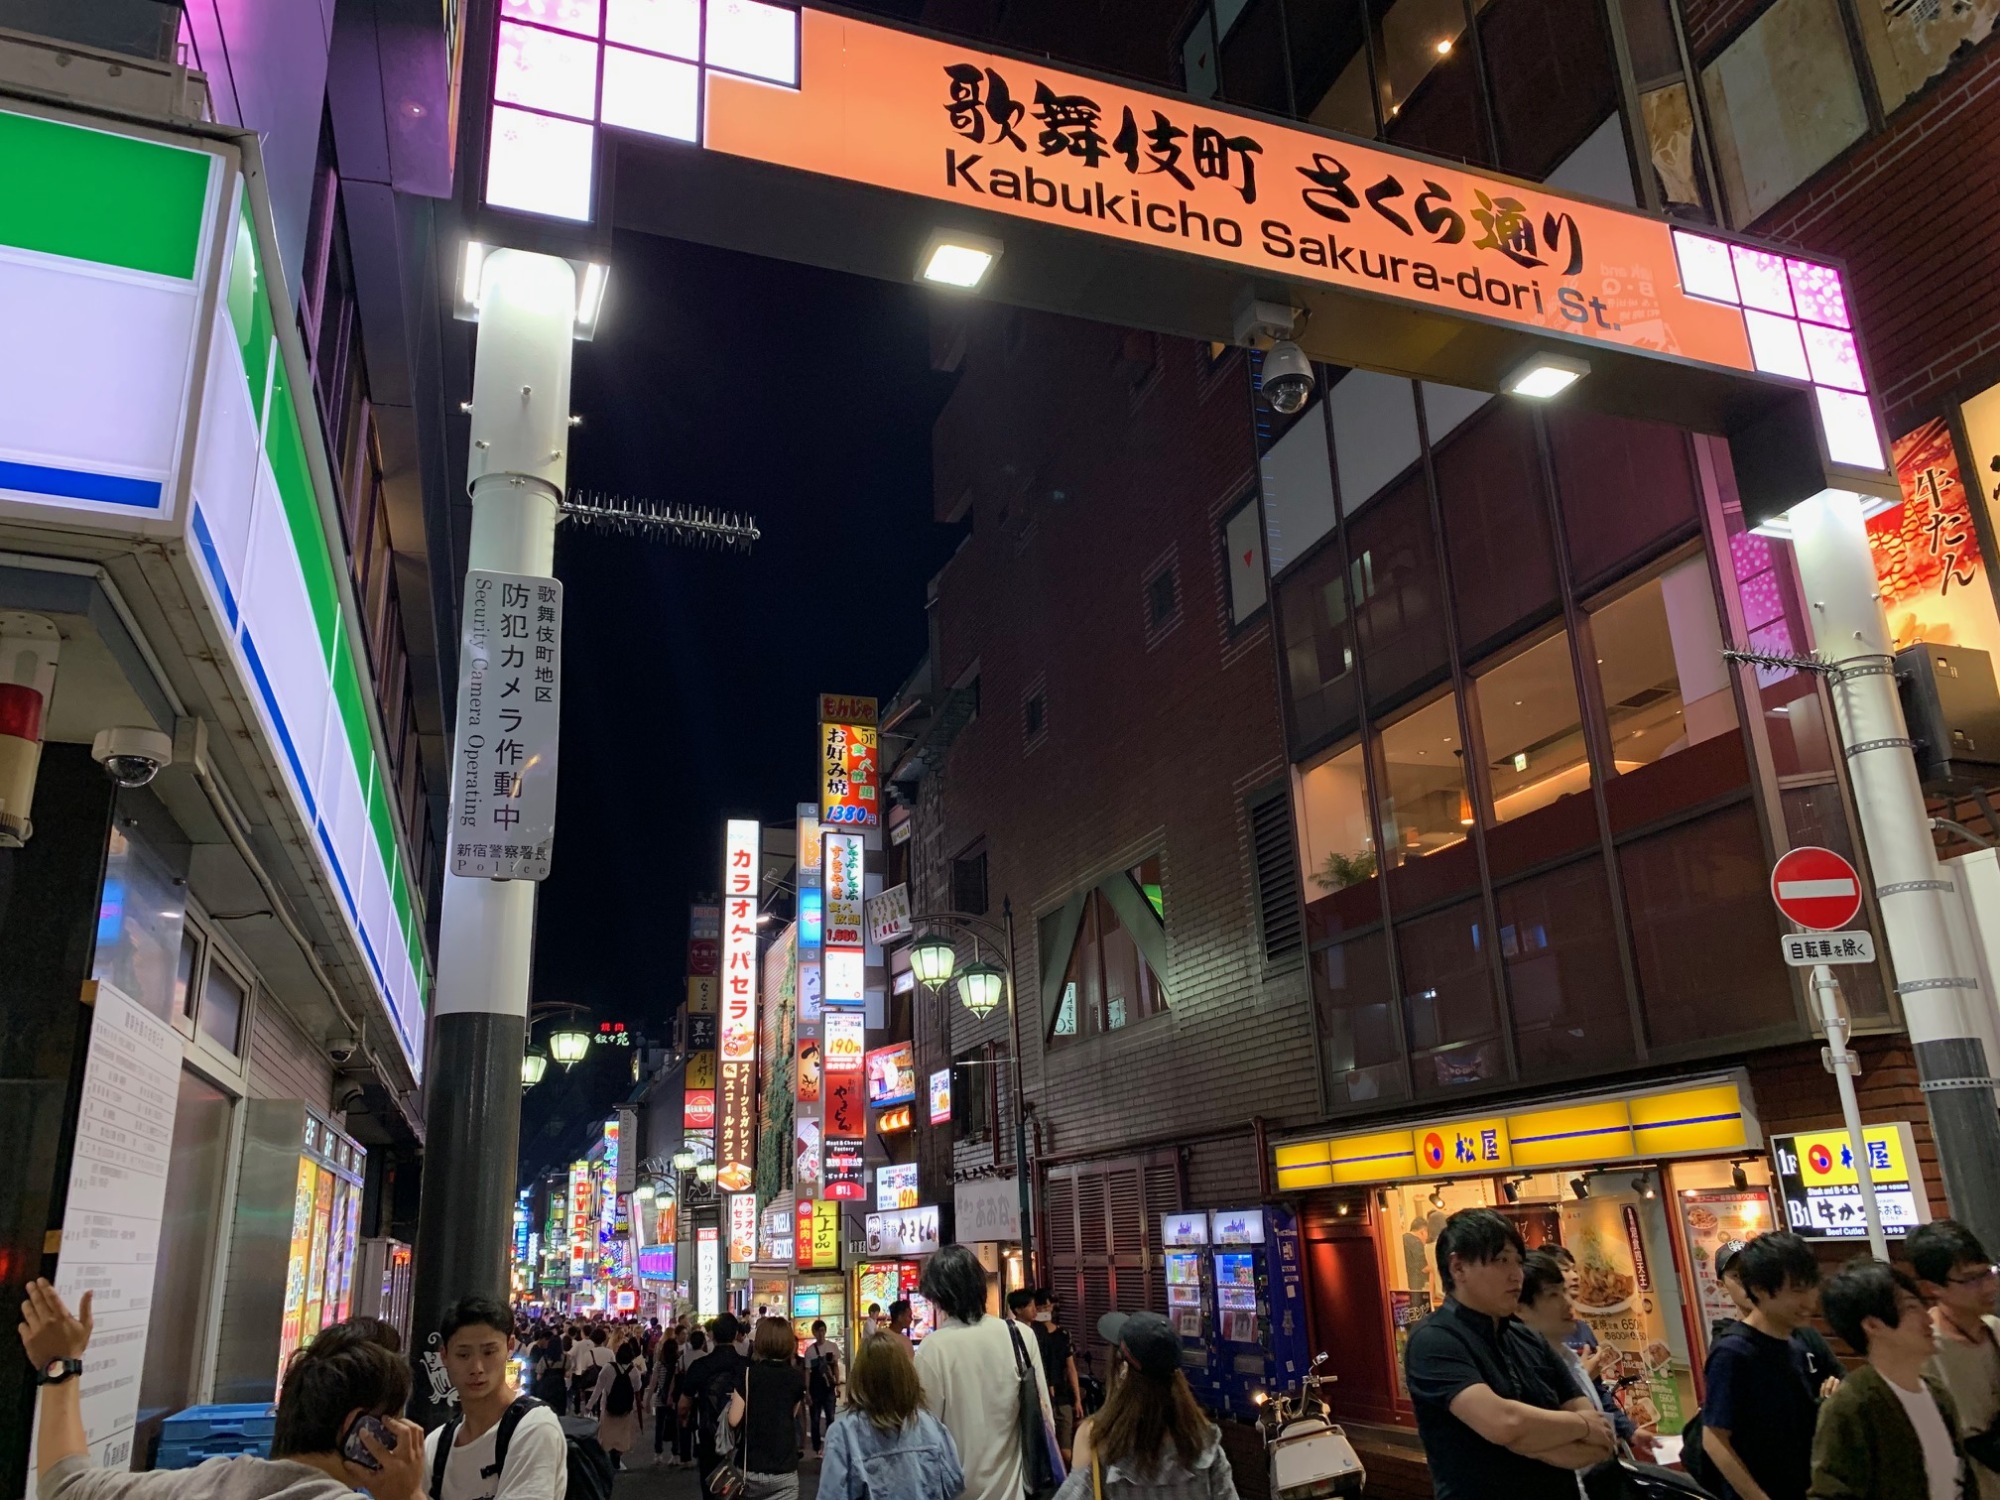 The U.S. Embassy has warned travelers to exercise caution in entertainment districts such as Shinjuku's Kabukicho. | JAKE ADELSTEIN